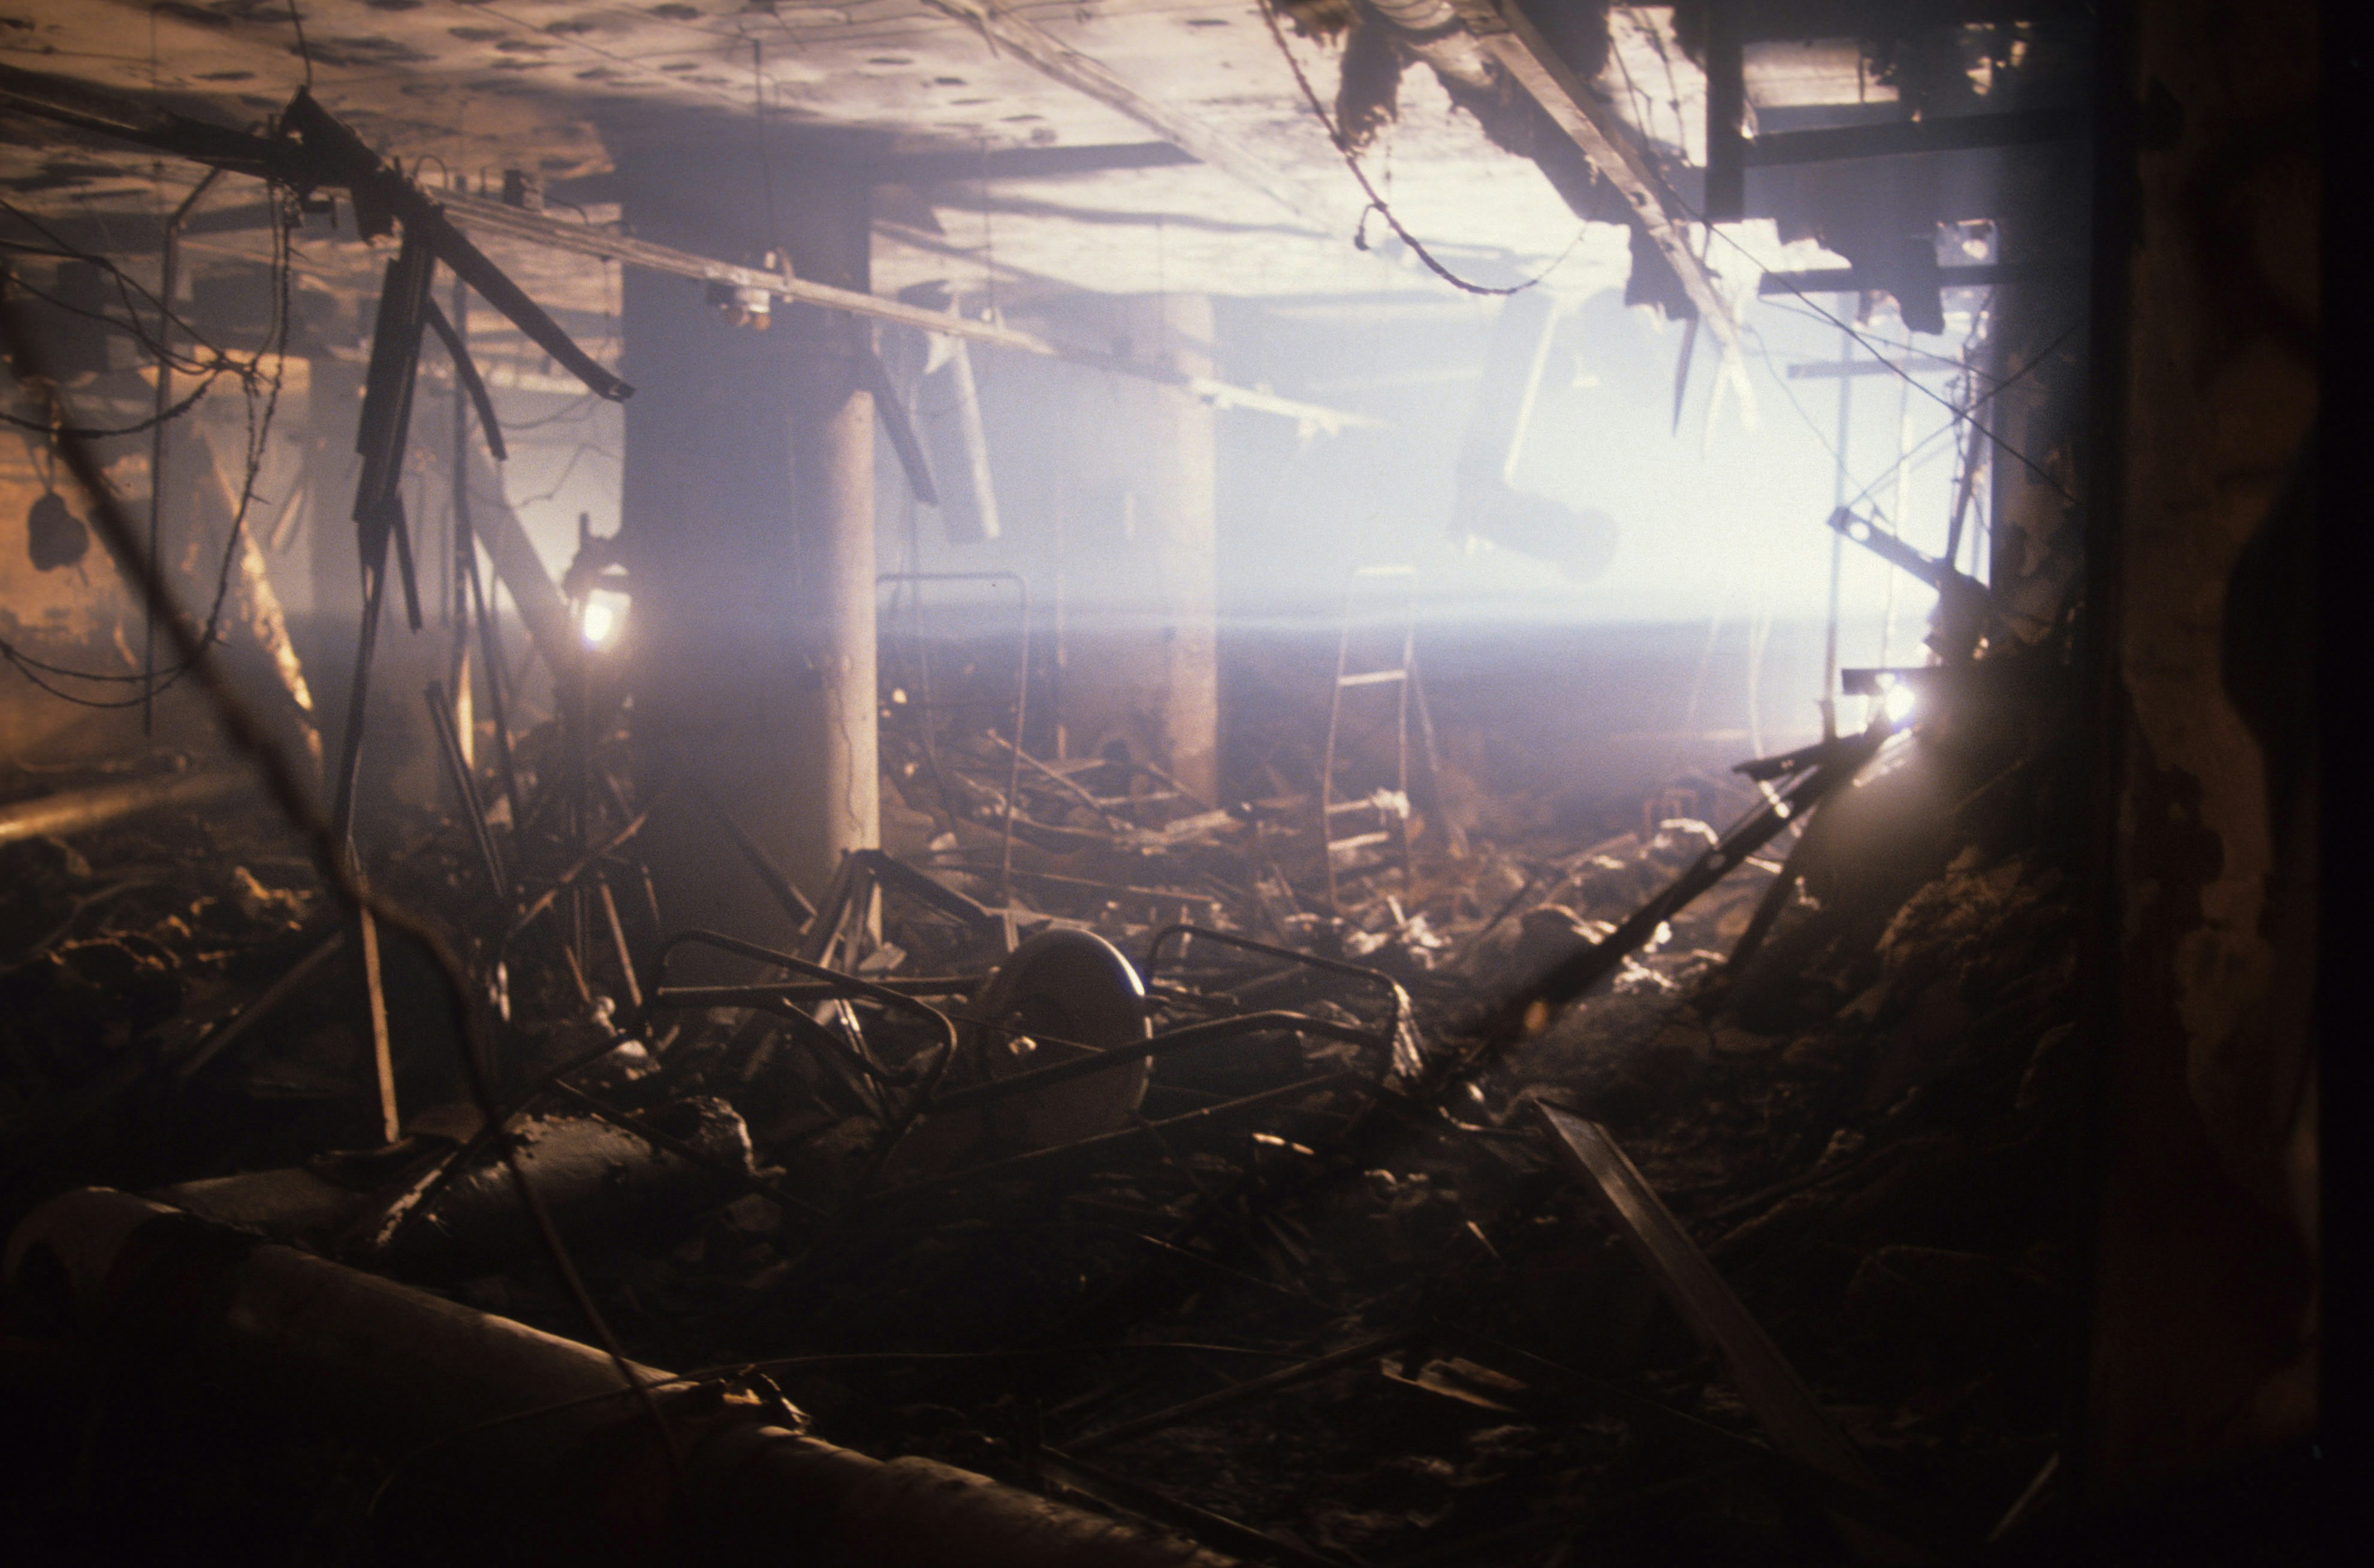 Interiors from a building in Amiriya district, a residential area on Baghdad's western outskirts, after an Allied bombing on an air raid shelter by US bombers, Gulf War, 14th February 1991. More than 500 women and children died after two precision bombs from American Stealth aircraft struck the site. (Photo by Kaveh Kazemi/Getty Images)